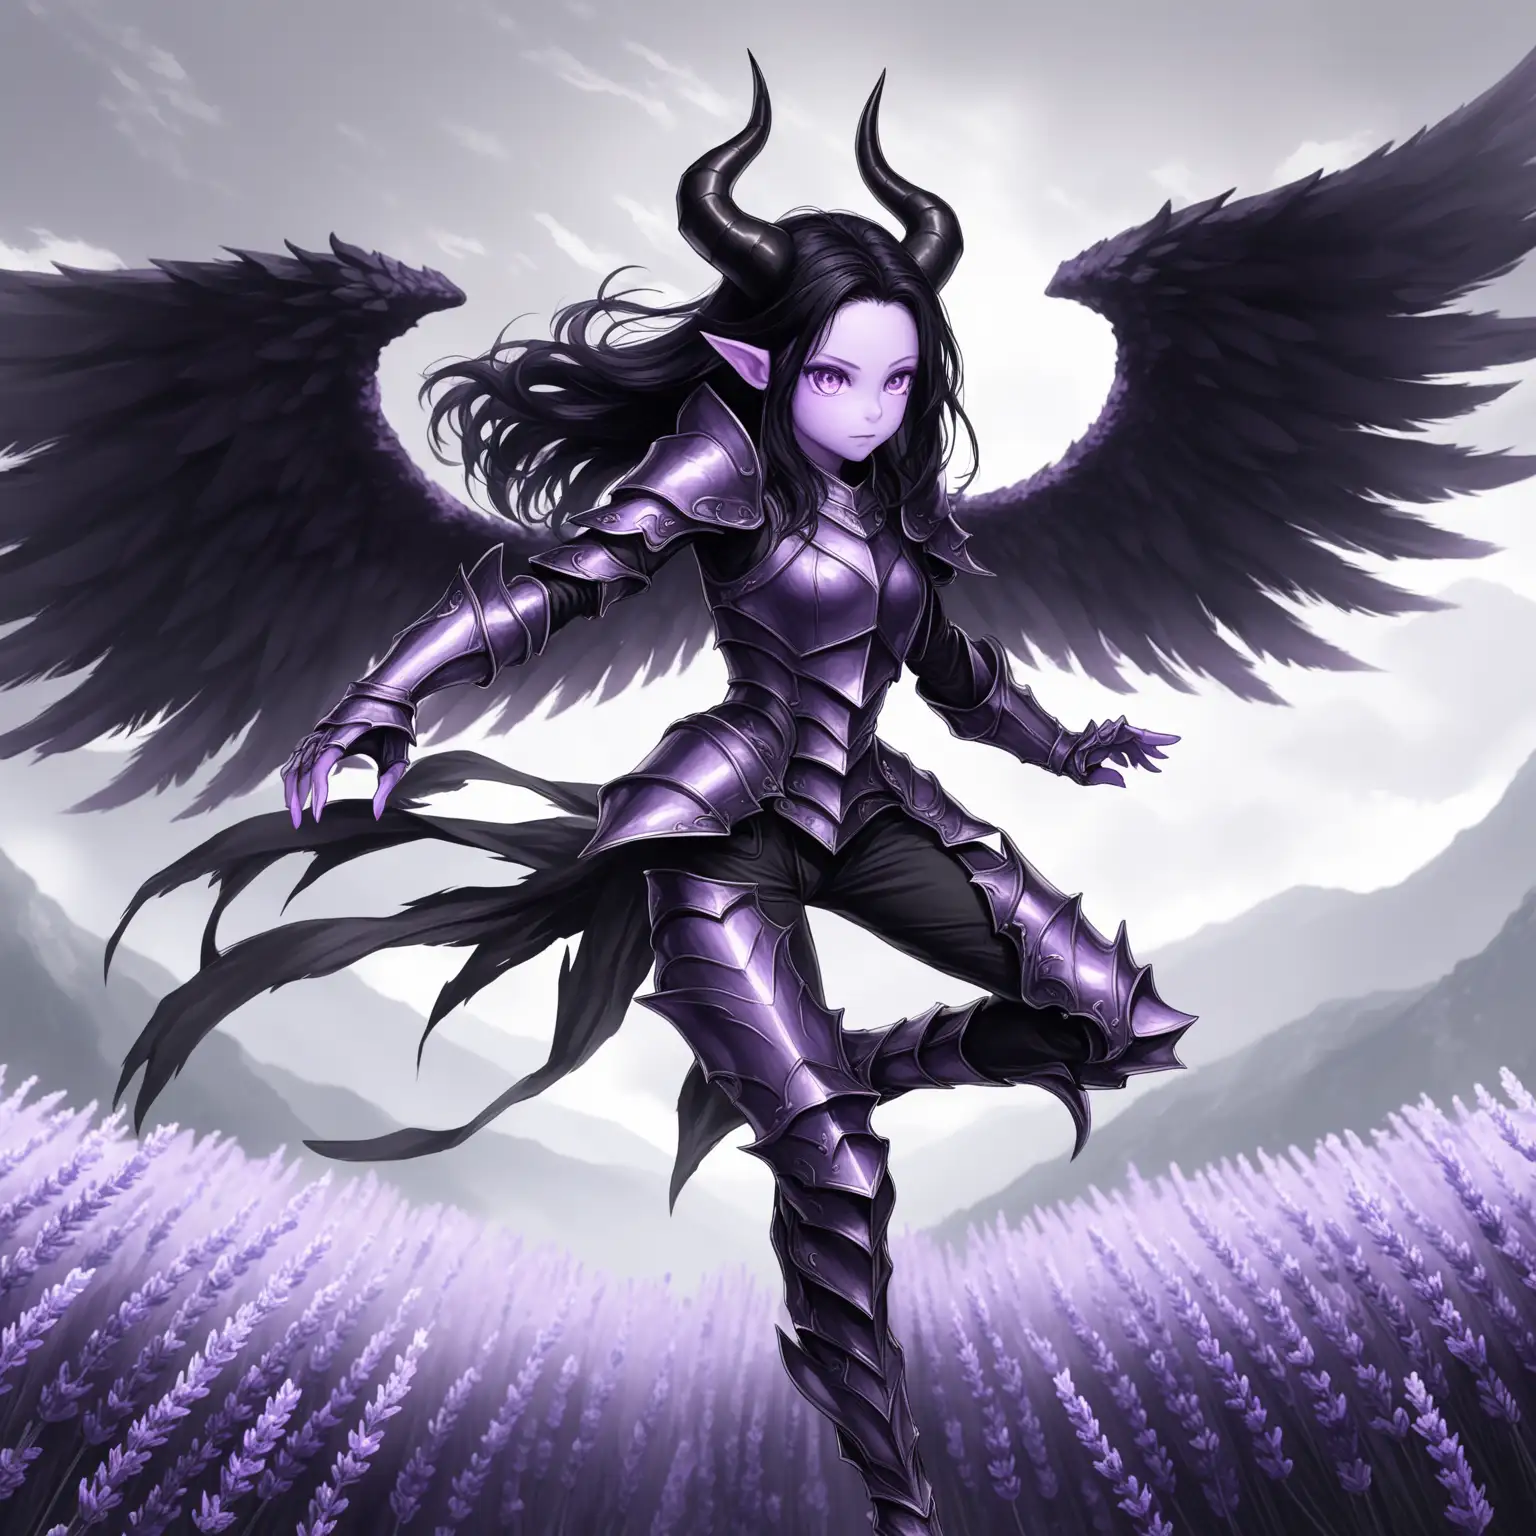 Adventurous Girl with Purple Eyes in Armor and Wings